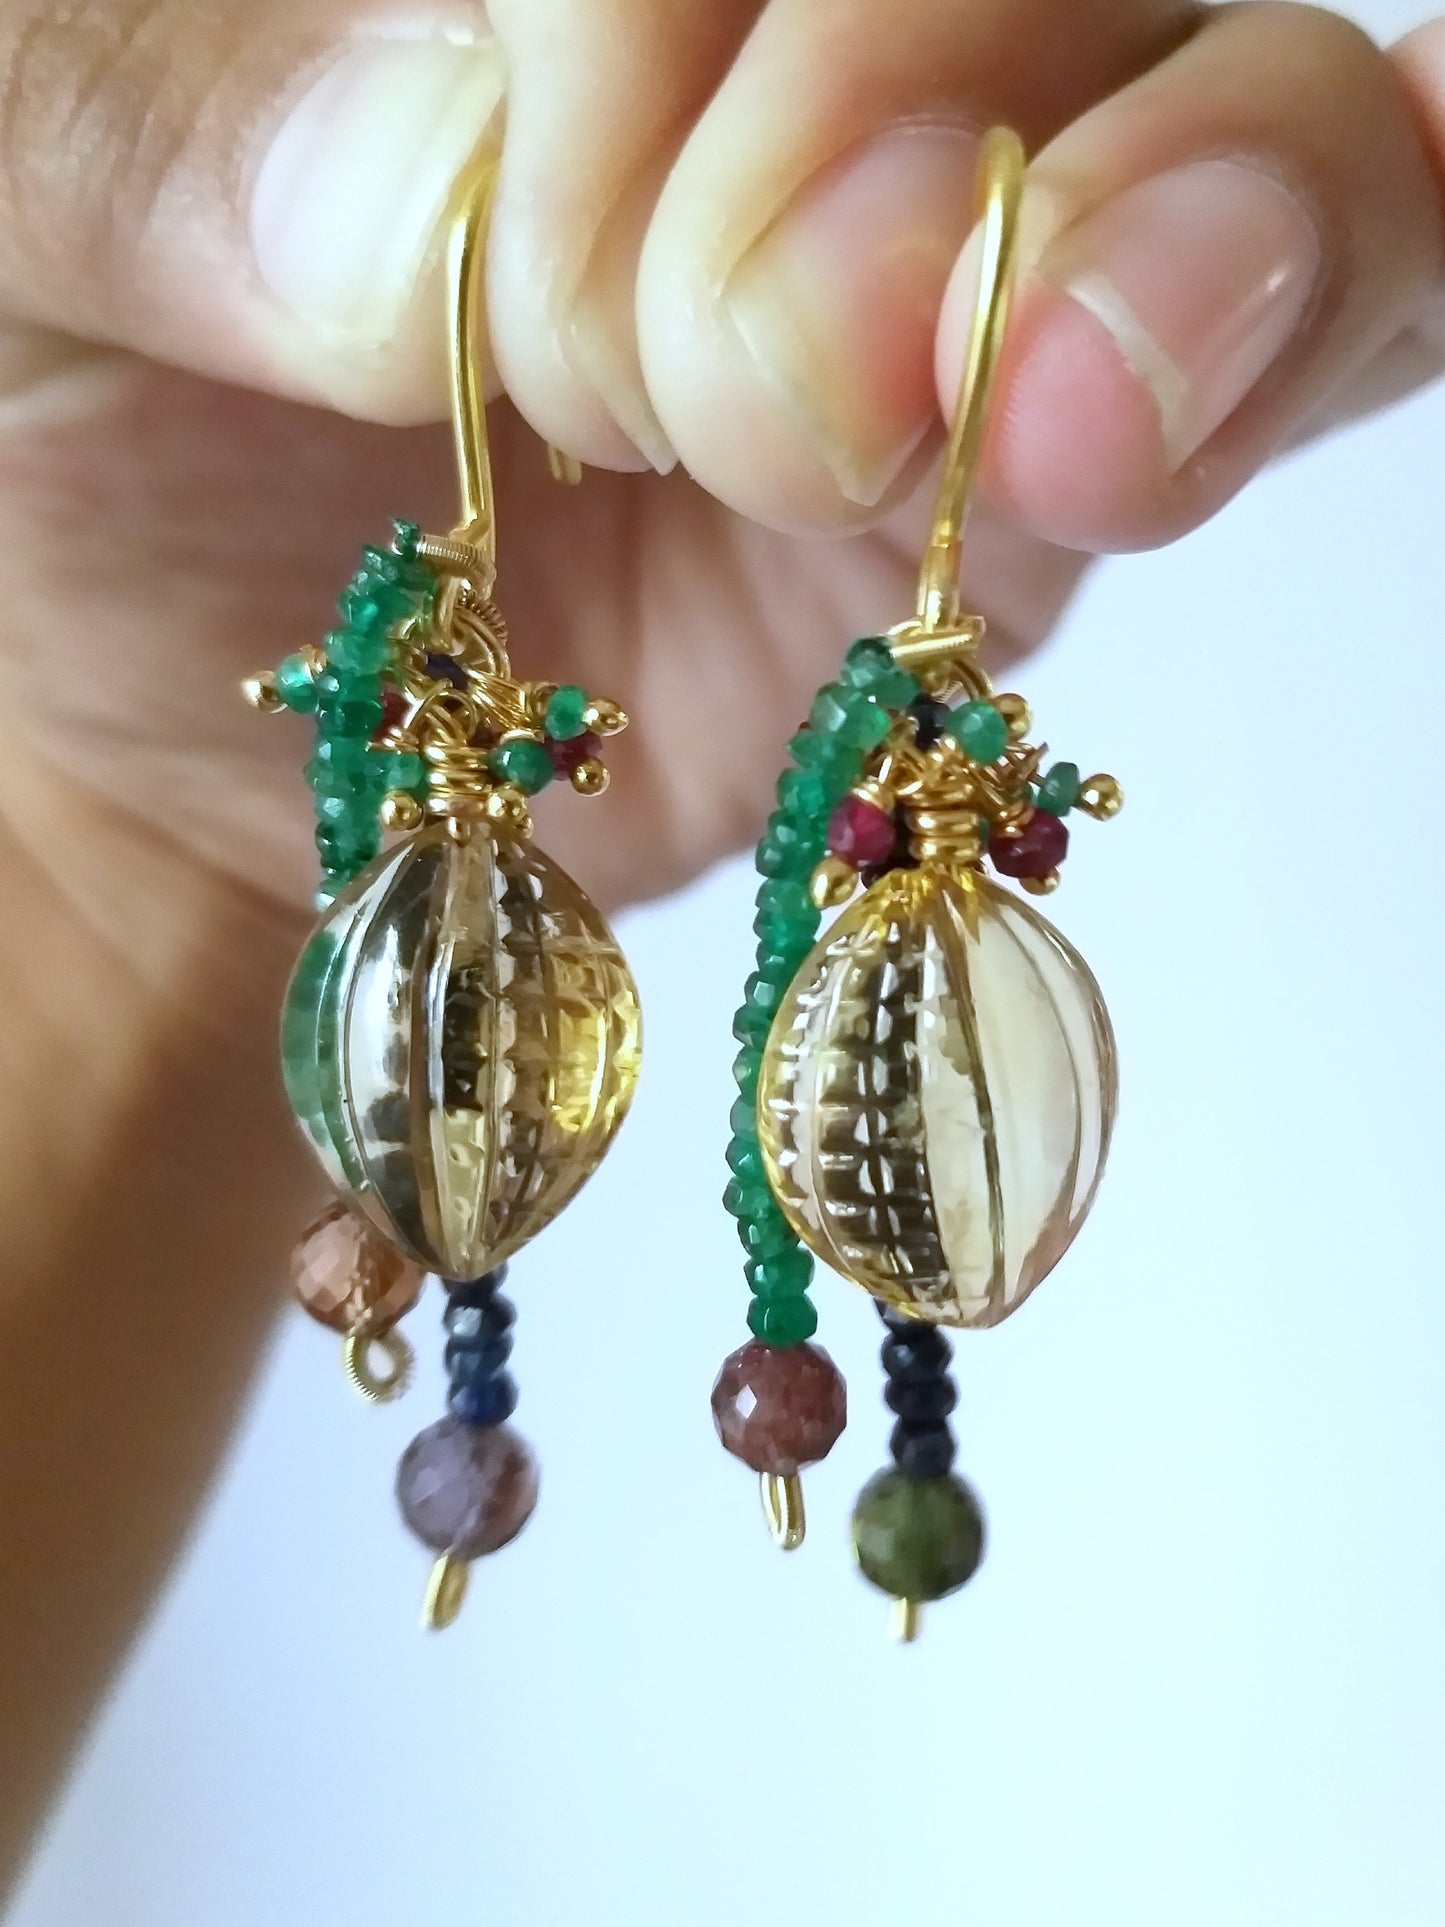 Natural Hand Carving Citrine Gemstone and Beads Statement Earrings